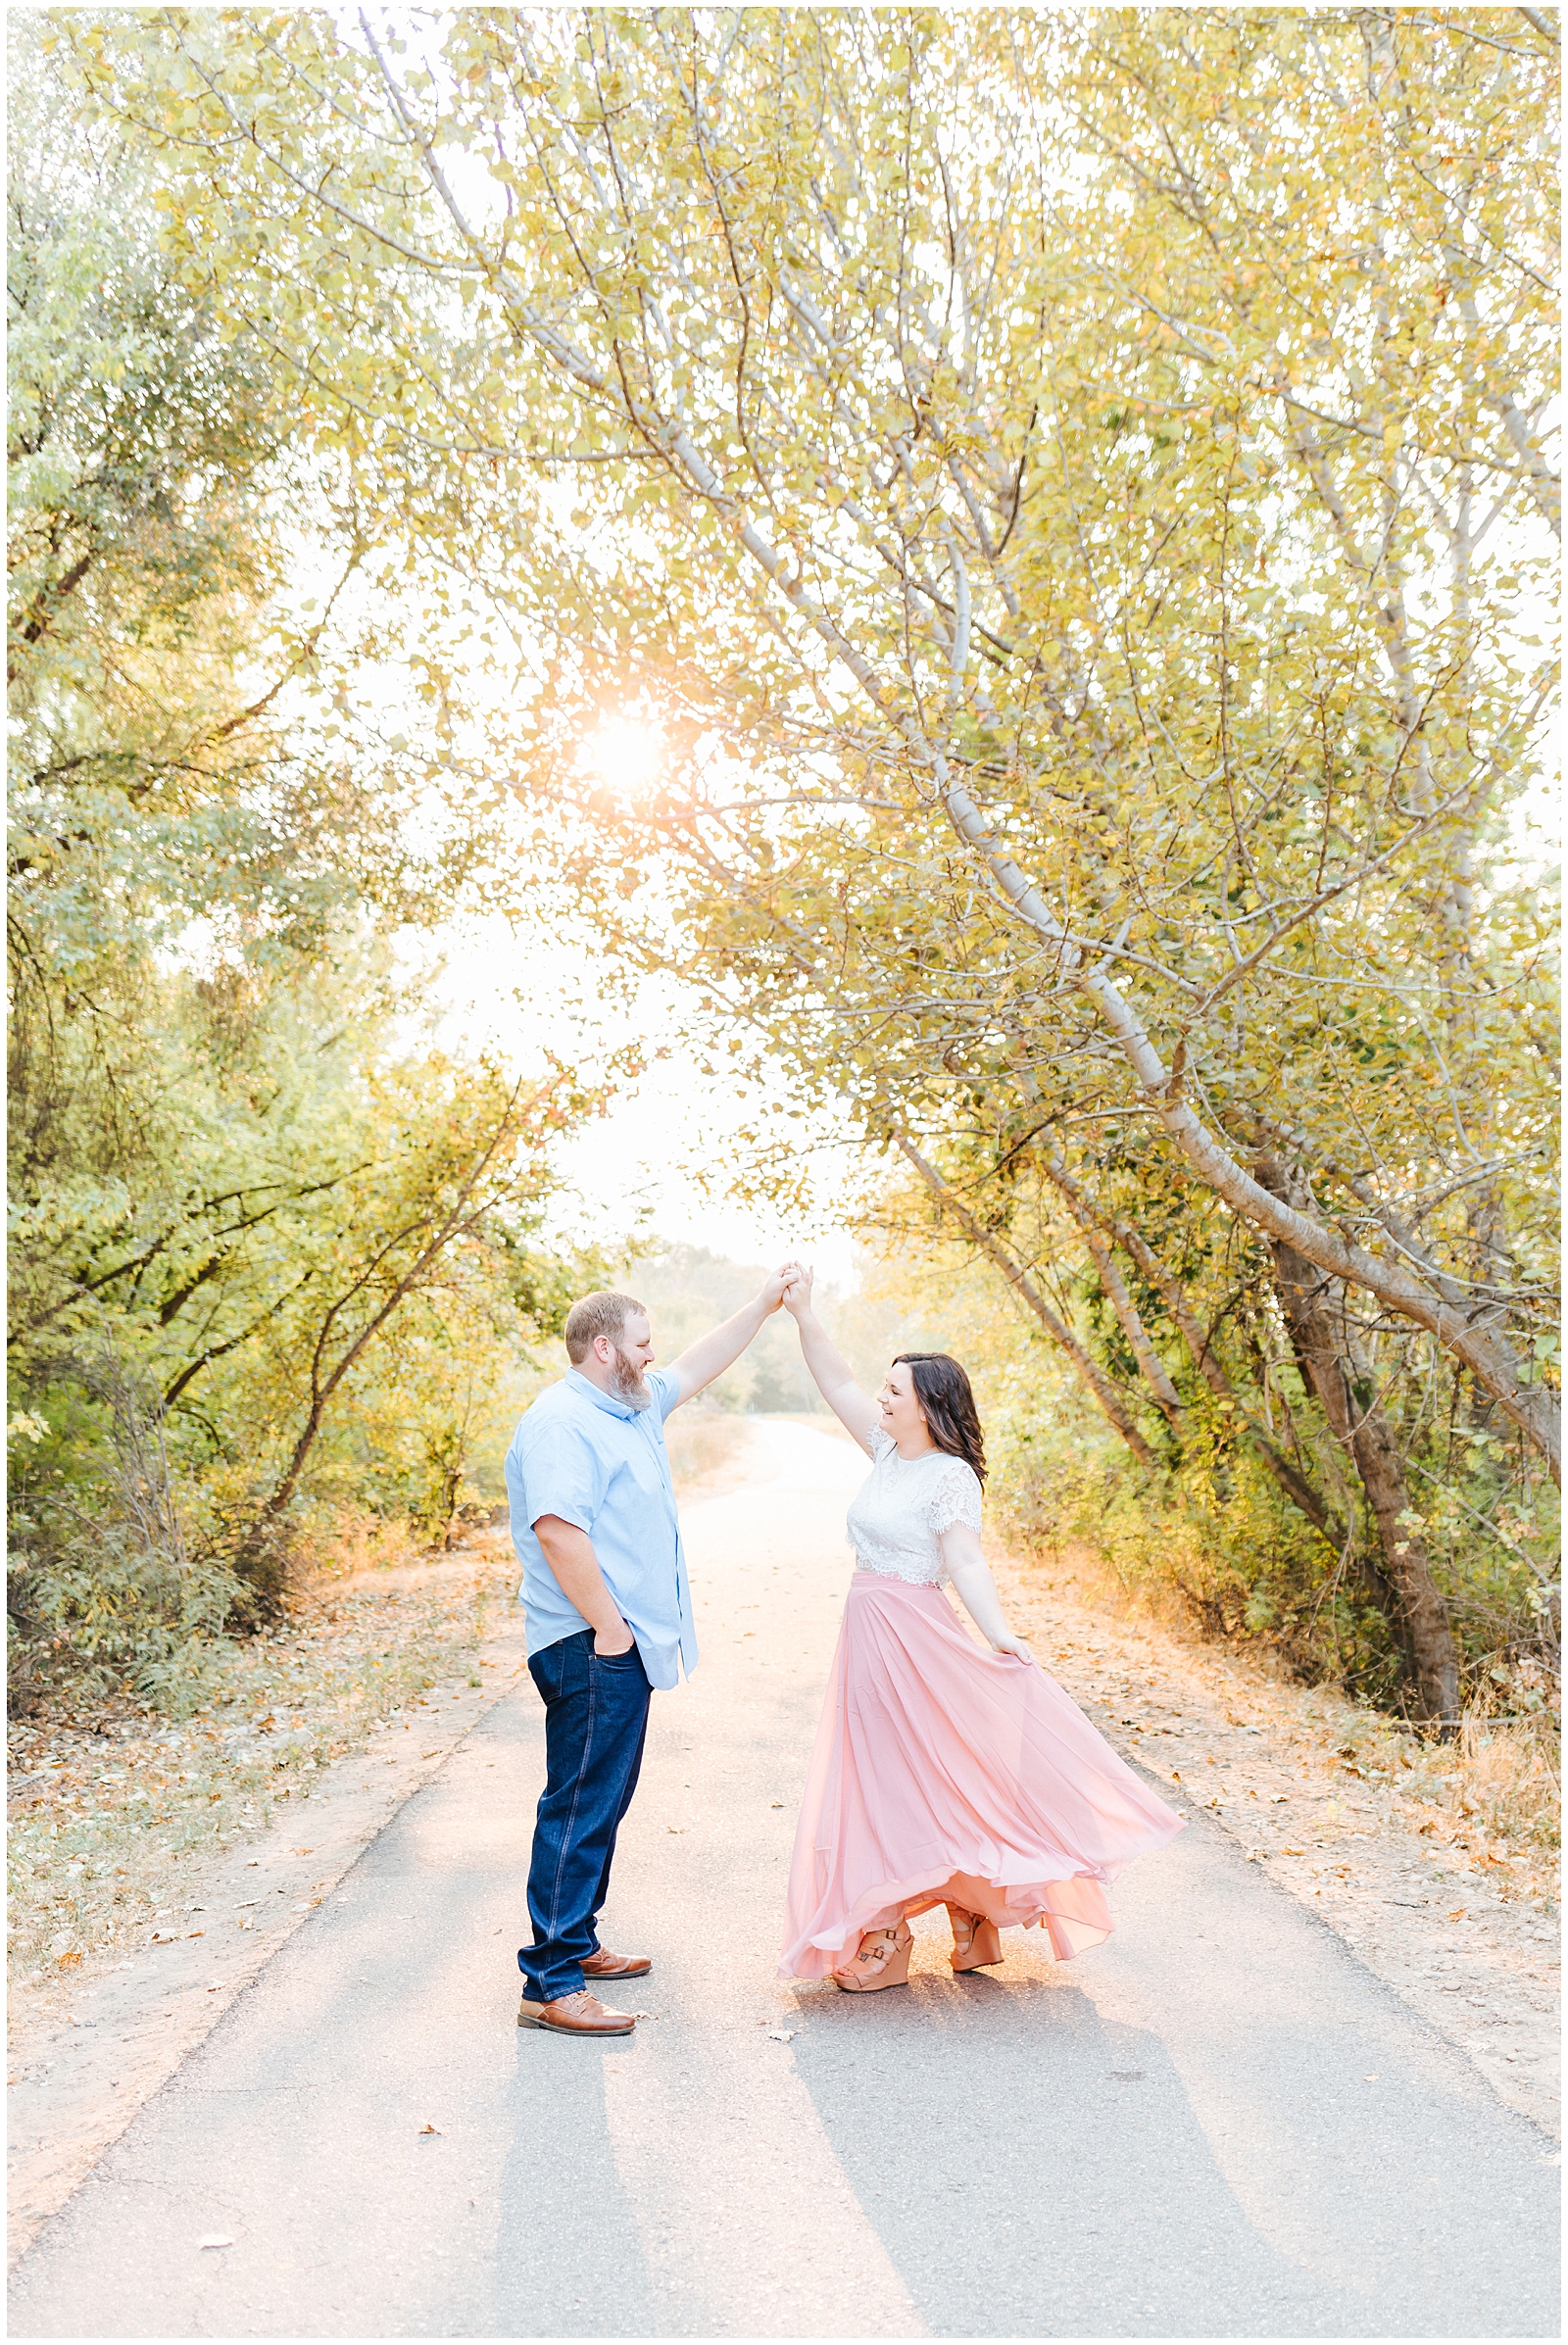 Dreamy Riverside Engagement at Golden hour in Boise Idaho Light & Airy Wedding Photographer